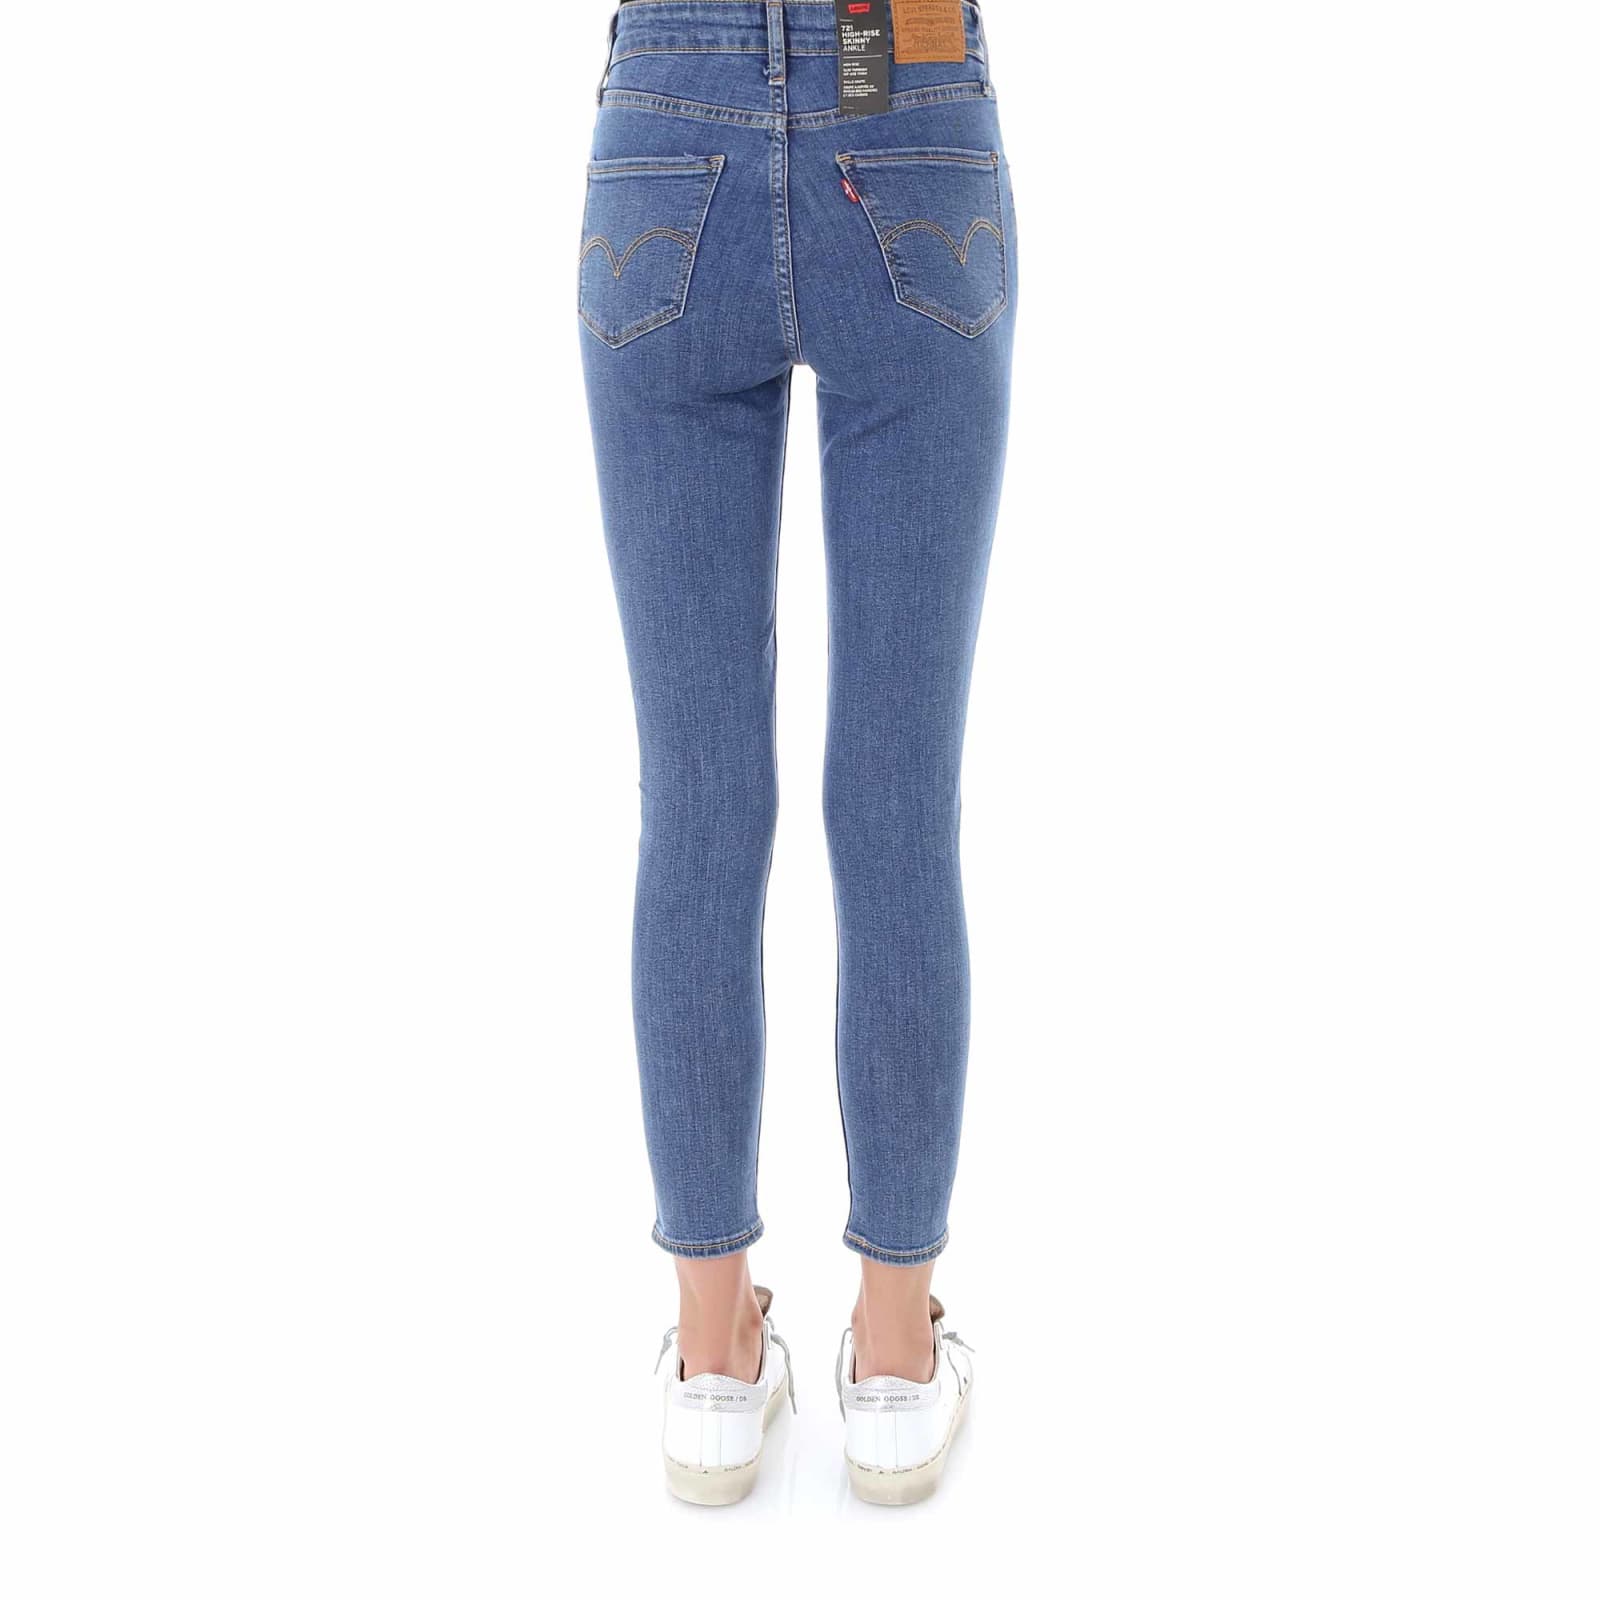 levi's 721 high rise jeans